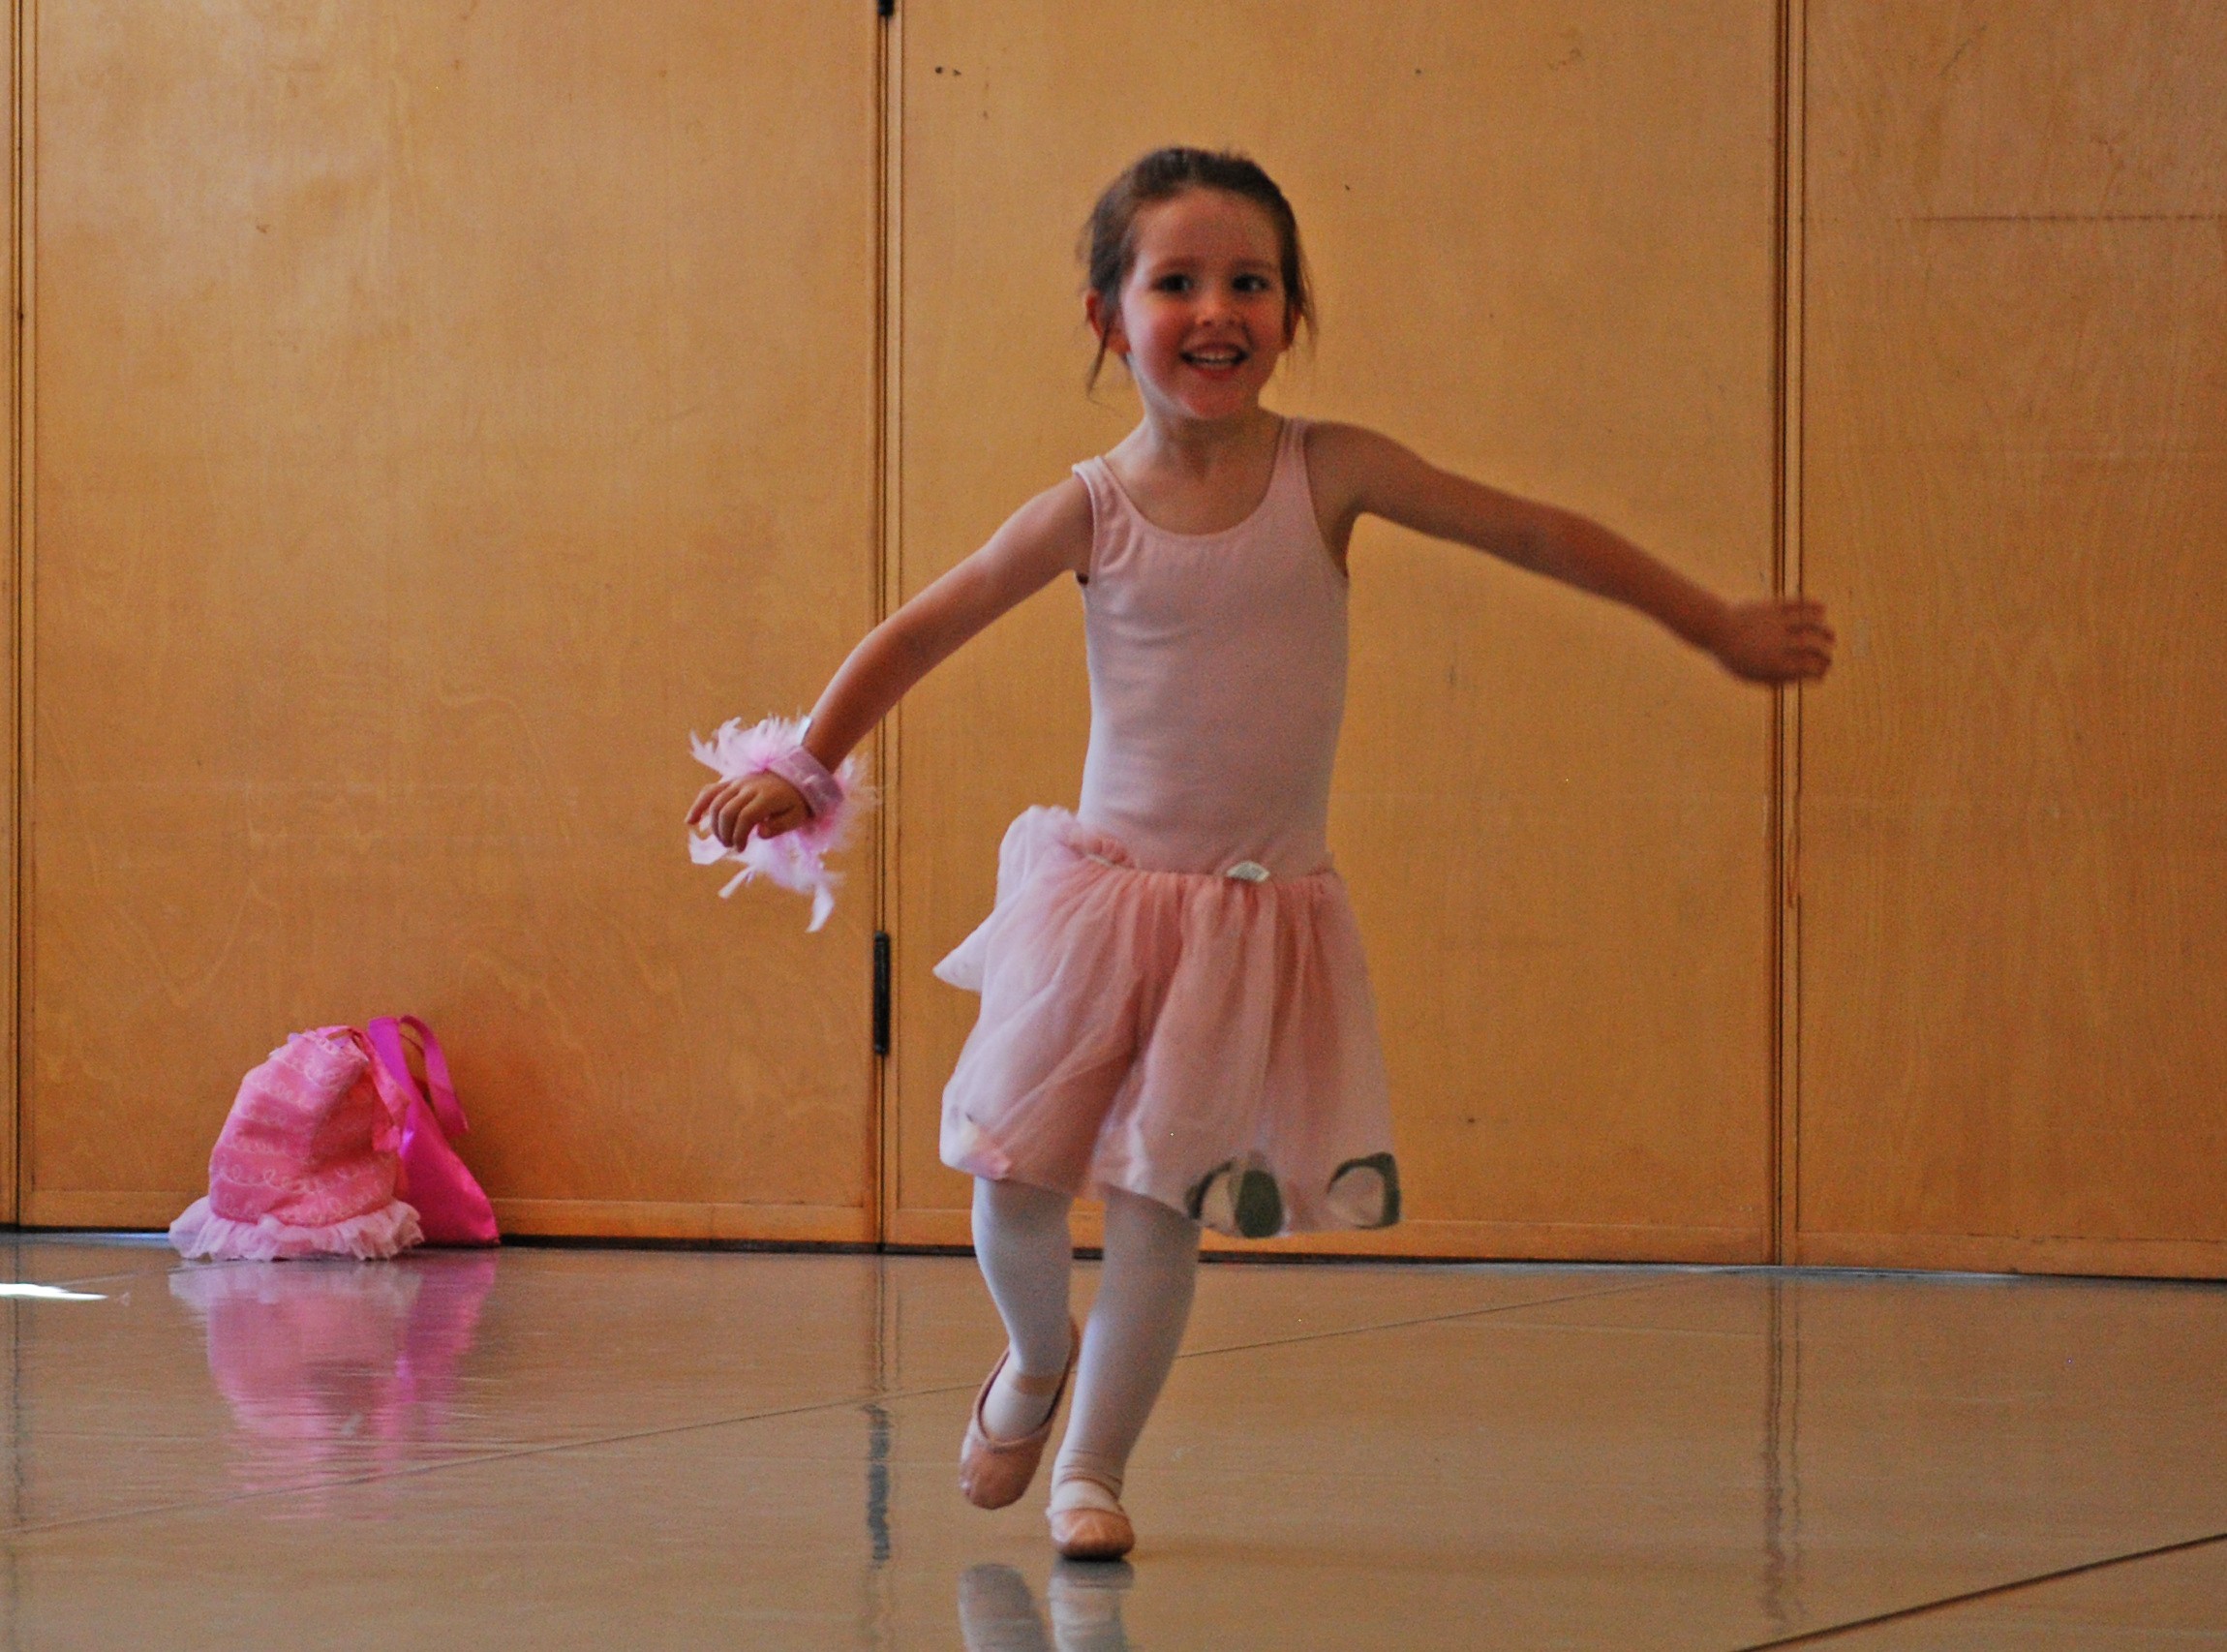 So, you want to be ballerina? - StageMinded - Coaching, Mentoring for Dancers, Performing Artists and Students